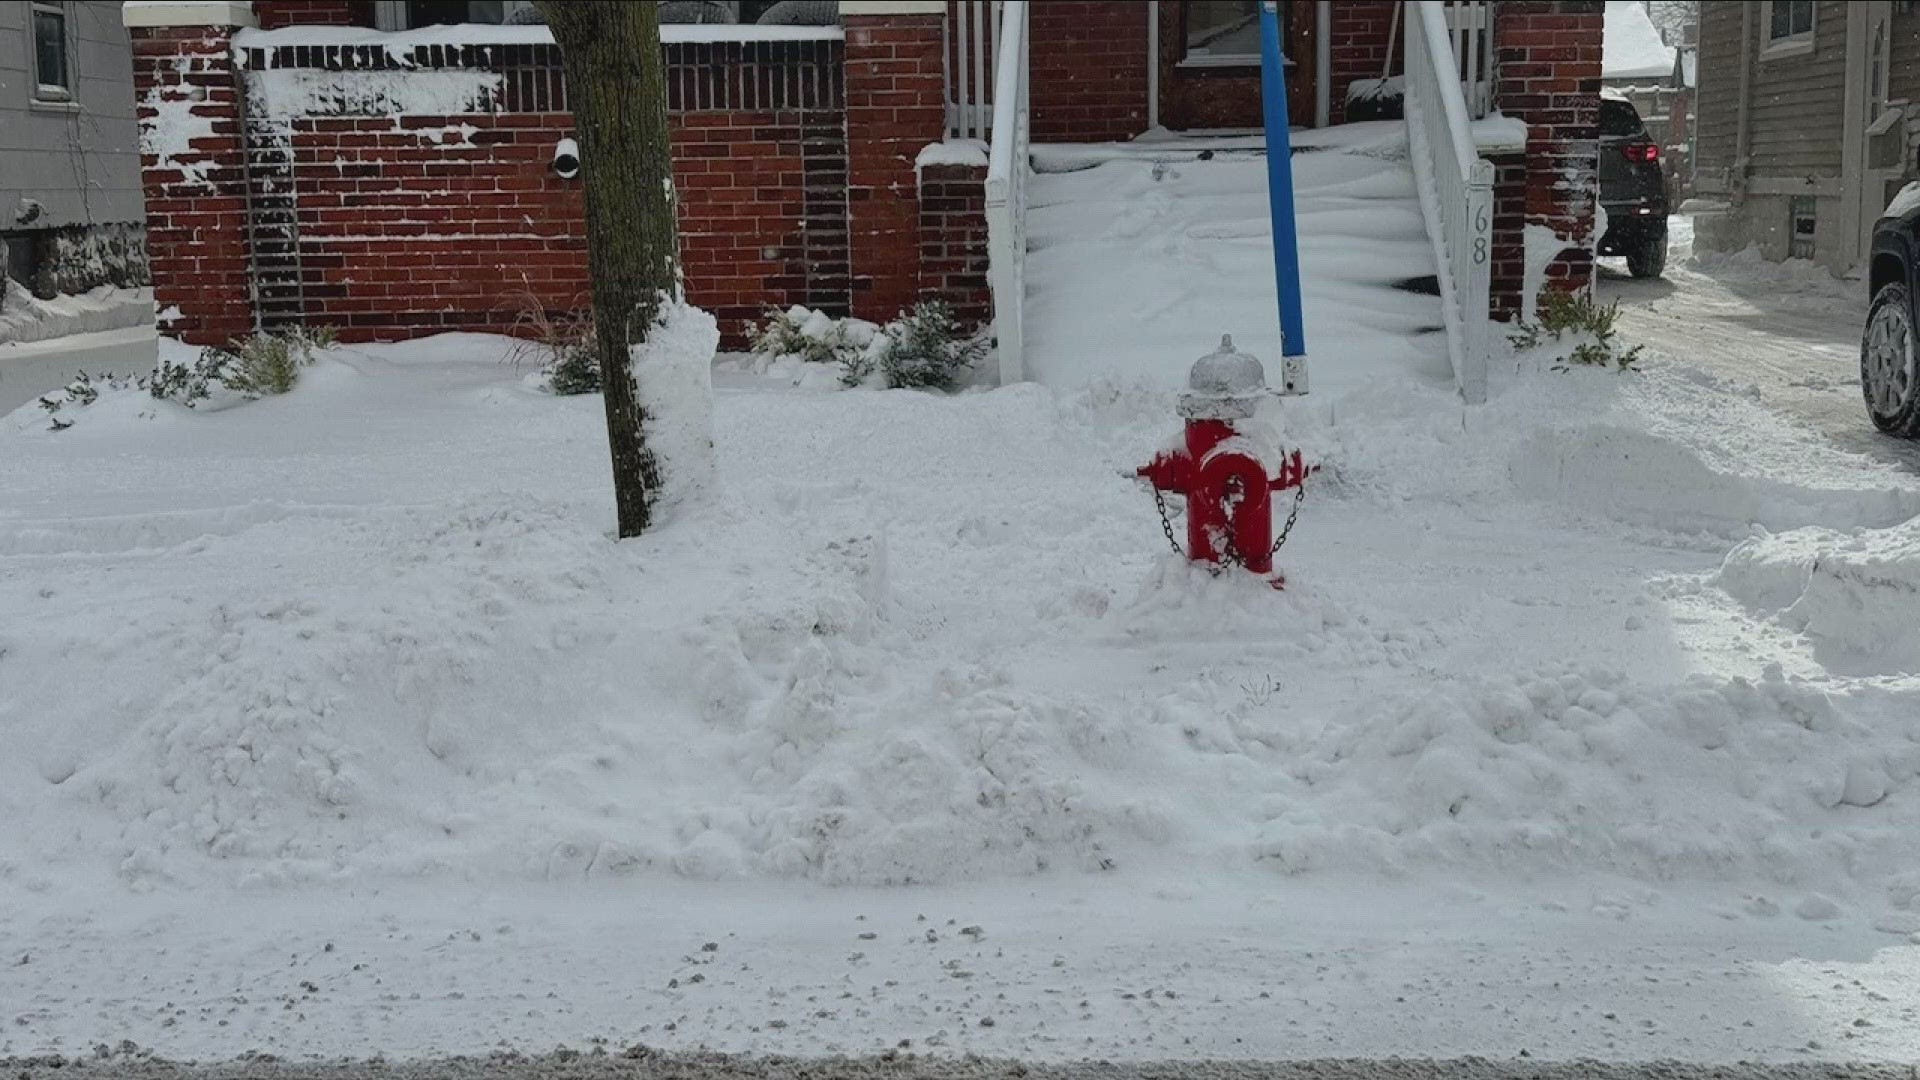 Three feet around each of your hydrants should be shoveled.